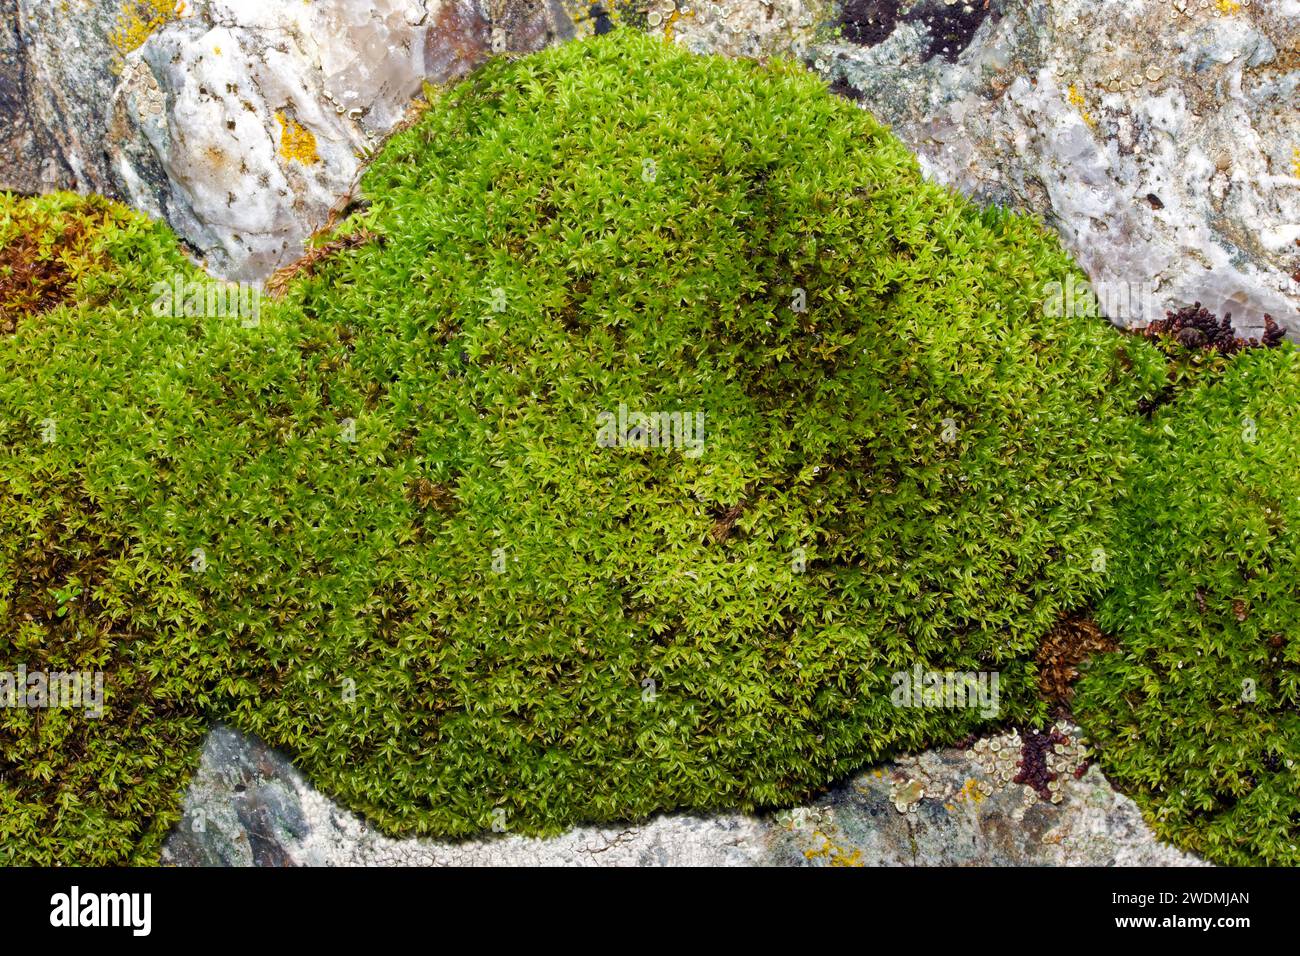 Streblotrichum convolutum is a common moss found in disturbed, open habitats such as gardens, fields and walls. It has worldwide distribution. Stock Photo